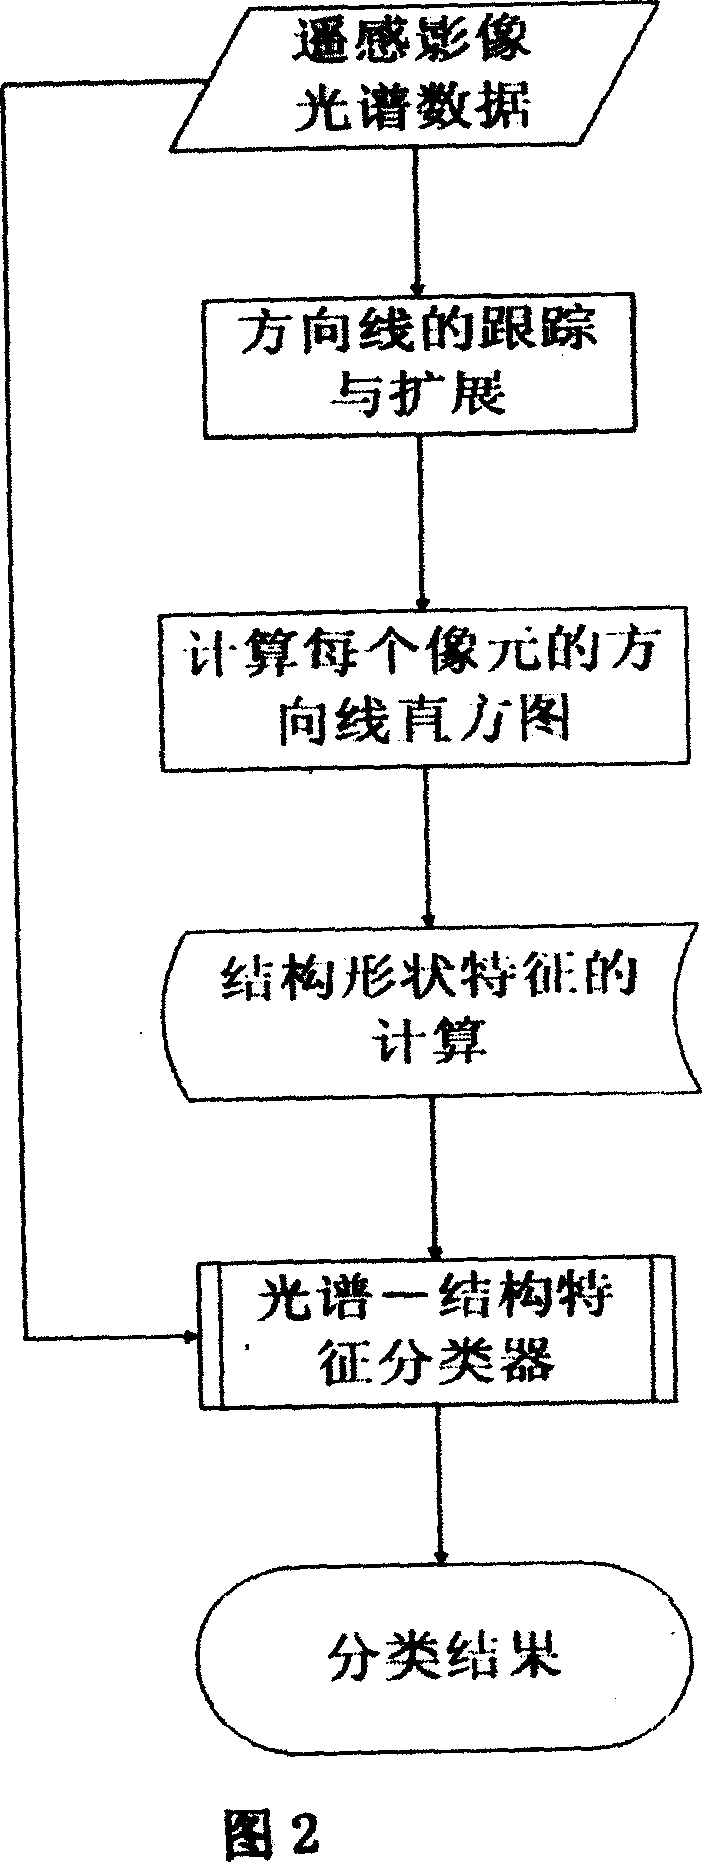 Remoto sensing image space shape characteristics extracting and sorting method